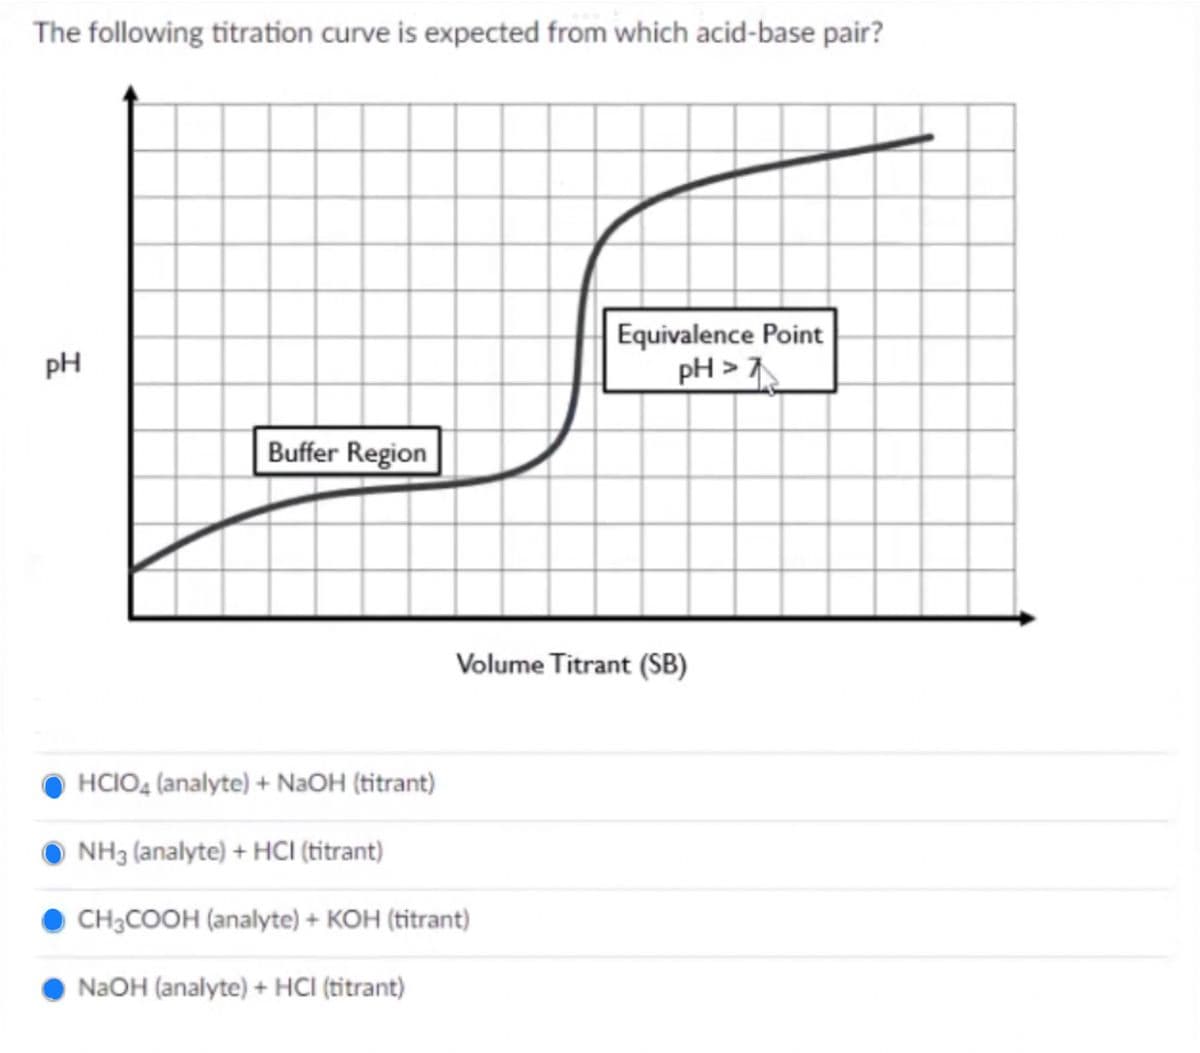 The following titration curve is expected from which acid-base pair?
Equivalence Point
pH > 7
pH
Buffer Region
Volume Titrant (SB)
HCIO4 (analyte) + NaOH (titrant)
NH3 (analyte) + HCI (titrant)
CH3COOH (analyte) + KOH (titrant)
NaOH (analyte) + HCI (titrant)
